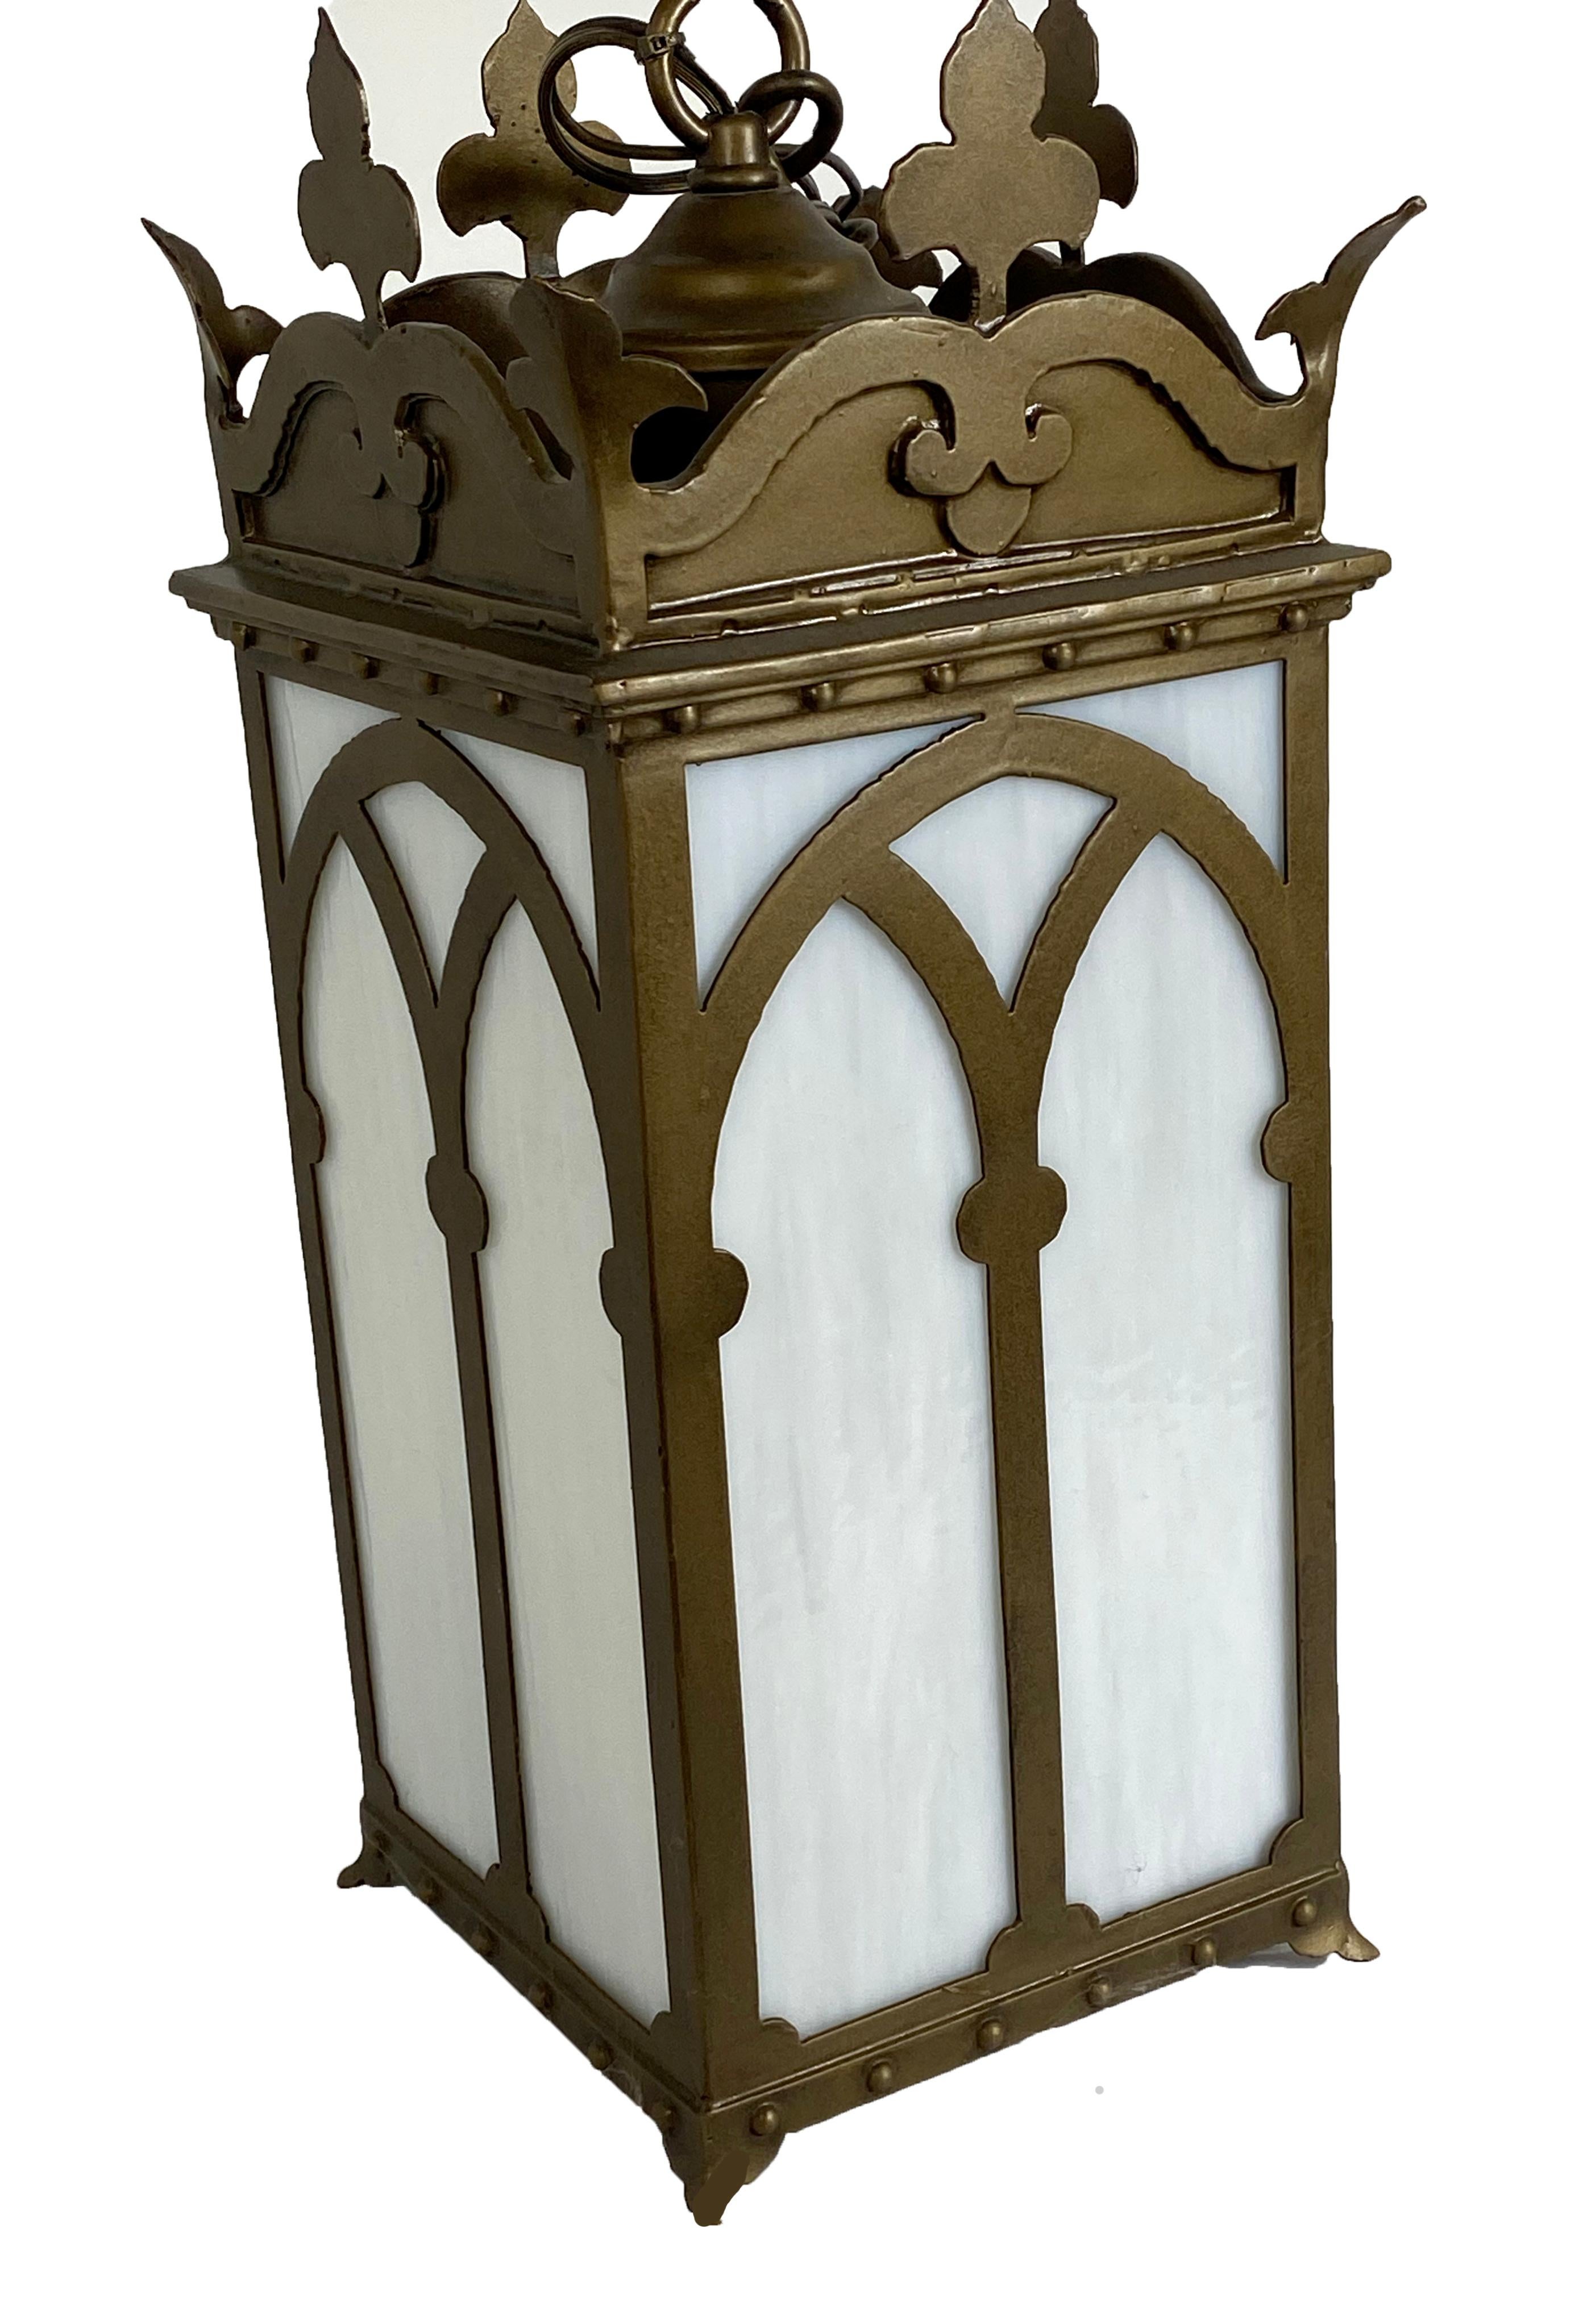 This authentic Wrought Iron  Gothic Lantern was originally made for a theme park in Anaheim Ca.  The intricate forged iron lantern is composed of over 50 individual handmade parts.   Precision and attention to detail is required for this high level